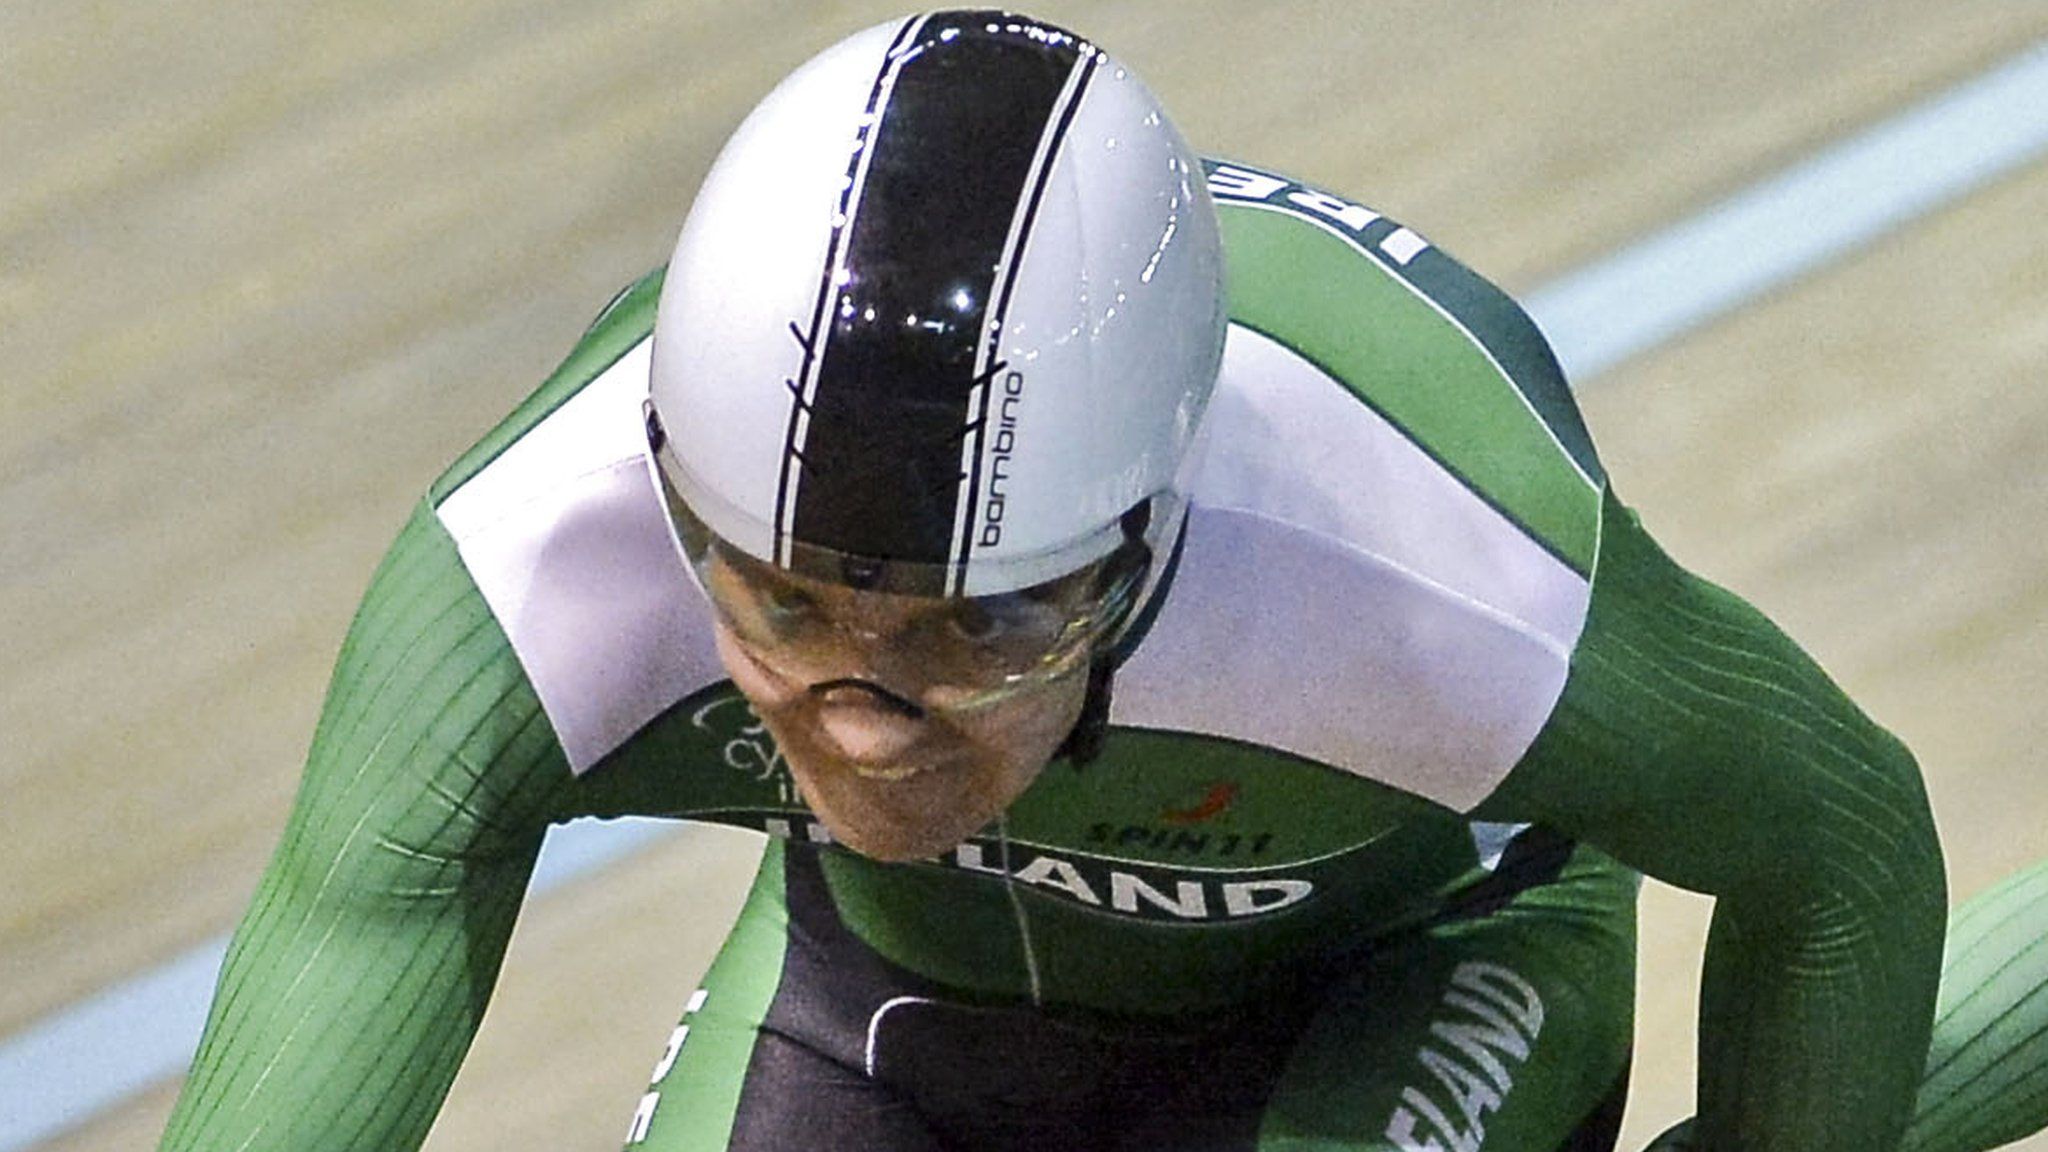 Mark Downey has won three World Cup events in his career